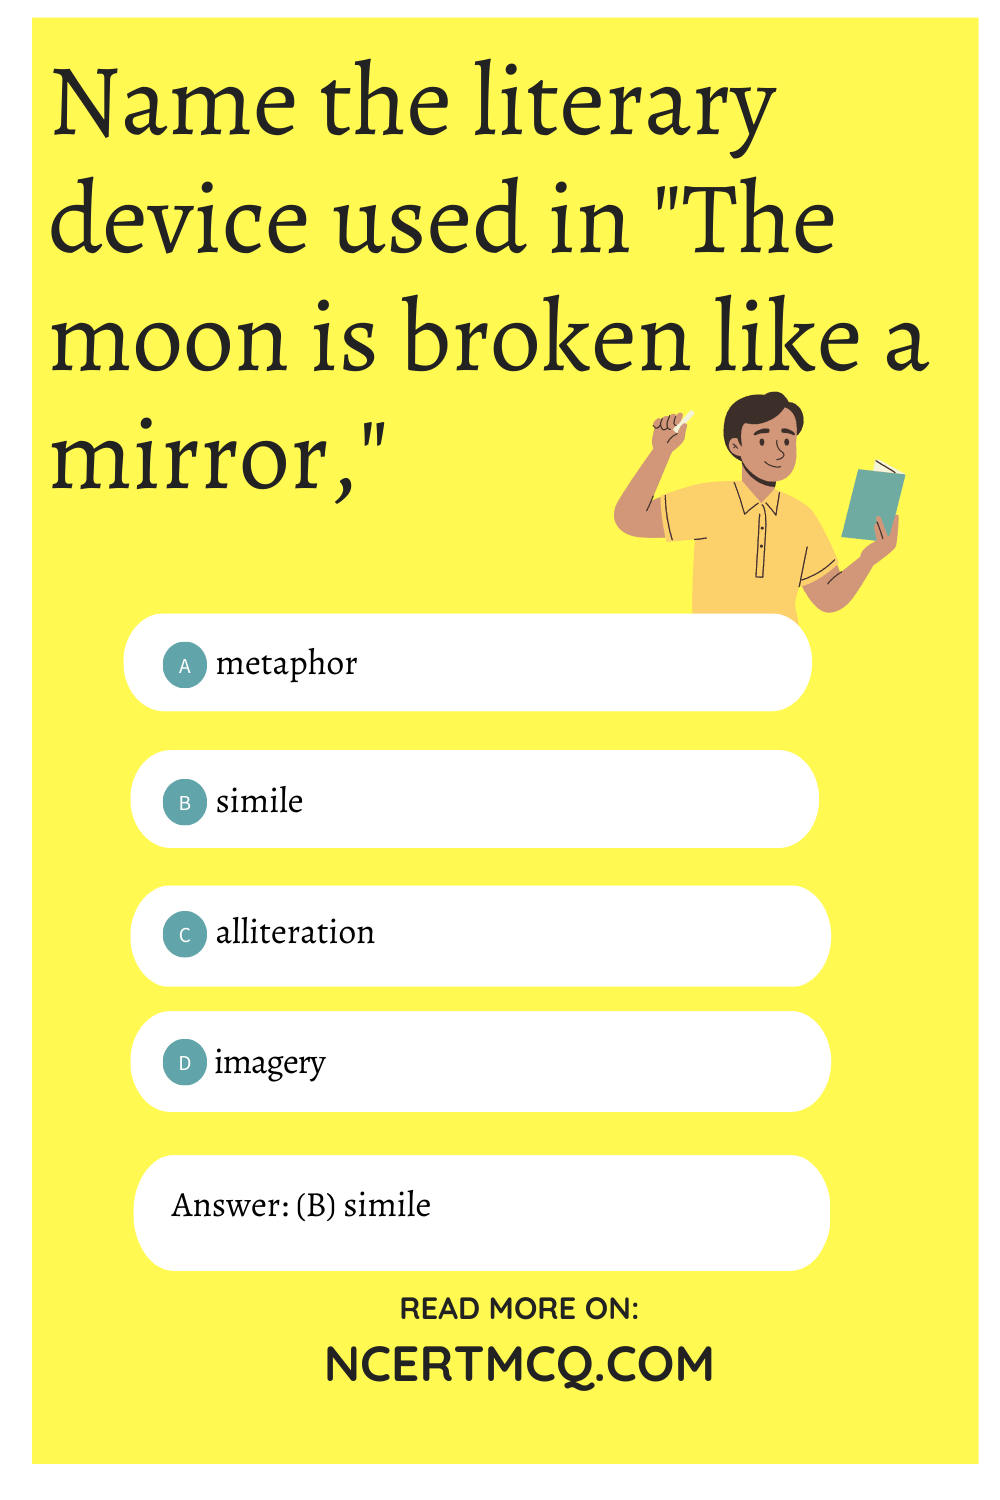 Name the literary device used in "The moon is broken like a mirror,"